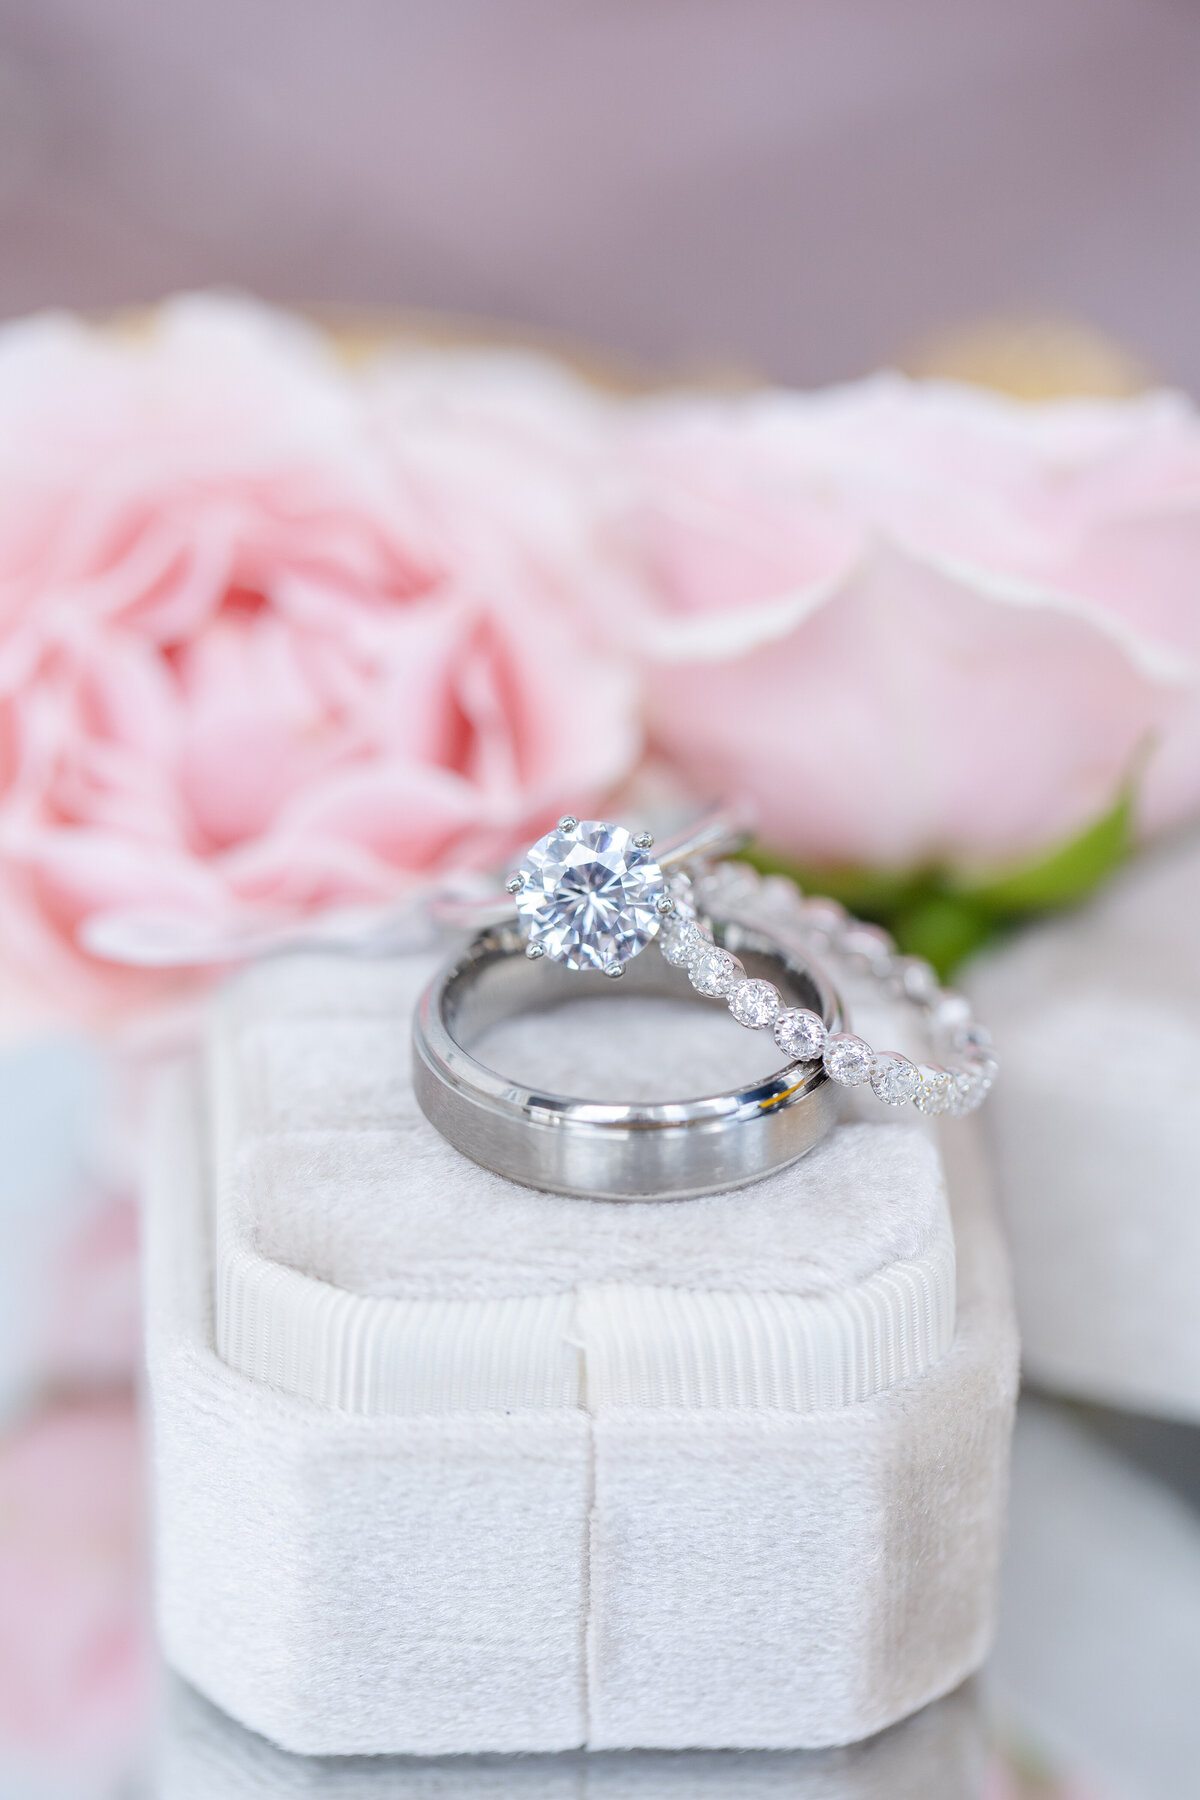 Wedding ring photography by Riley James.